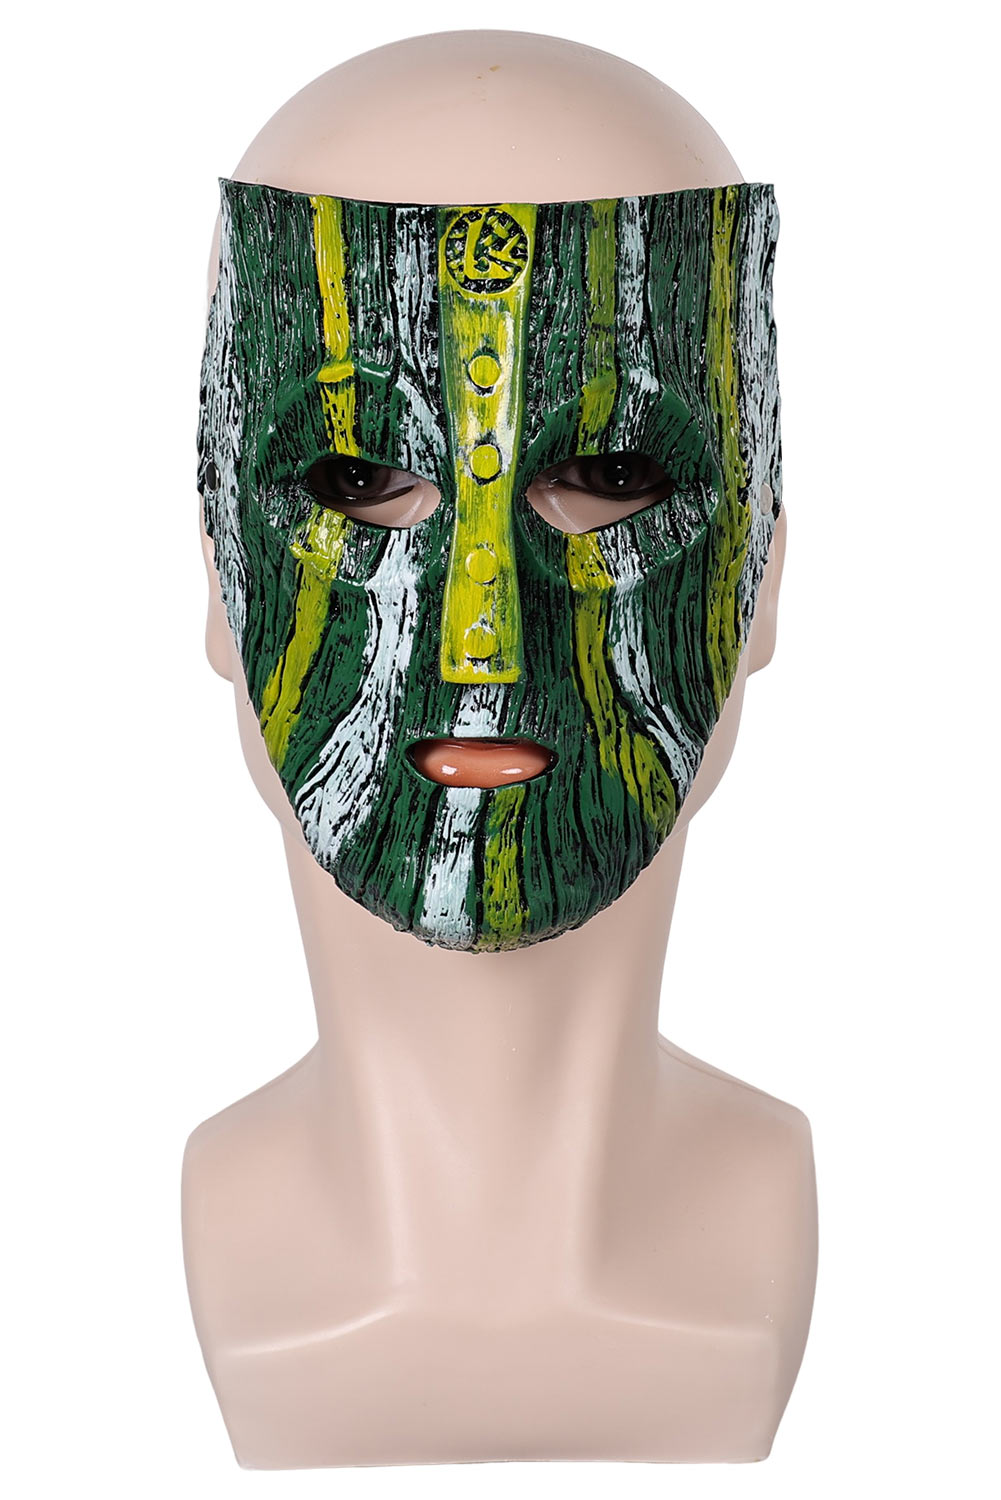 Movie Son of the Mask Tim Avery Loki Cosplay Latex Green Masks Helmet Masquerade Halloween Party Costume Props